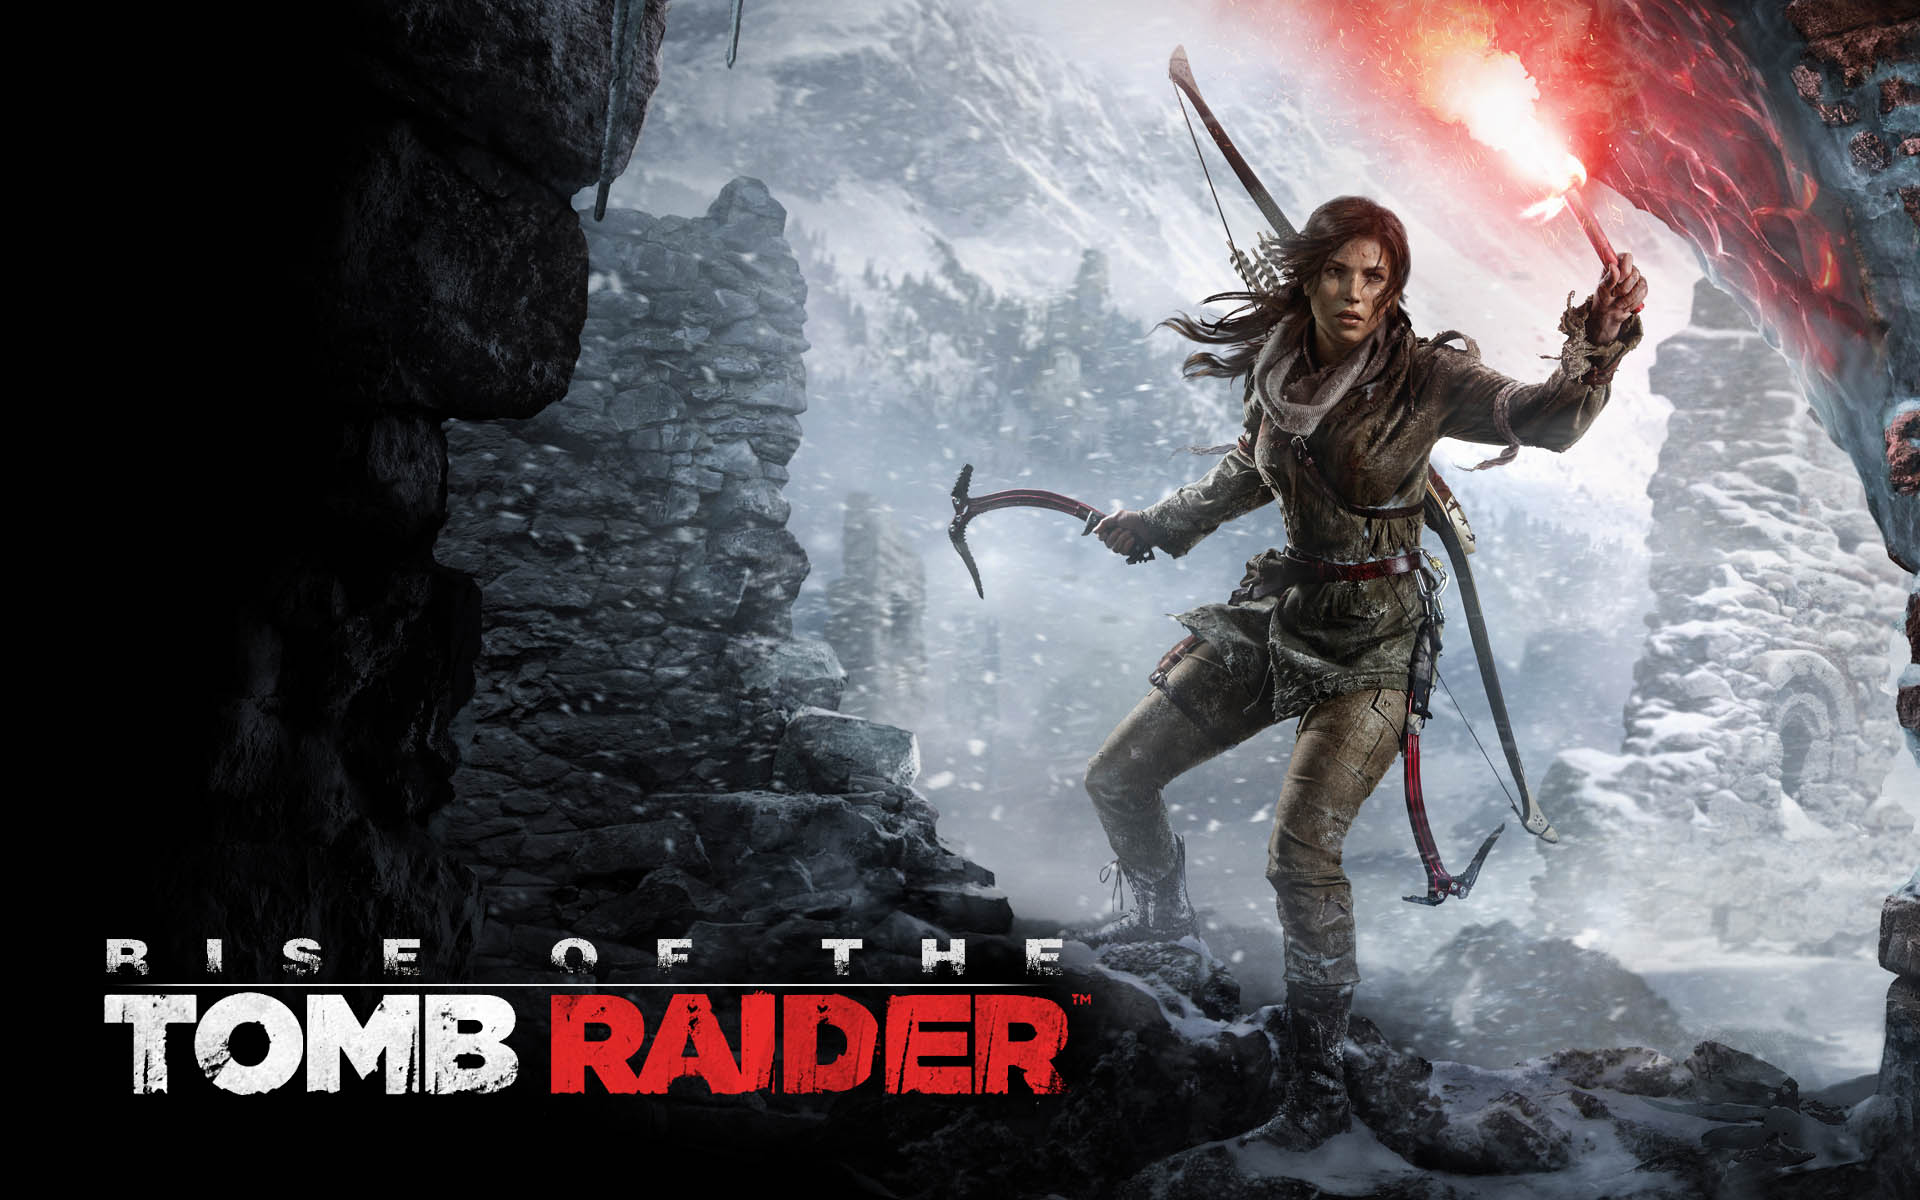 rise of the tomb raider AMD RYZEN 5 2600X PROCESSOR REVIEW